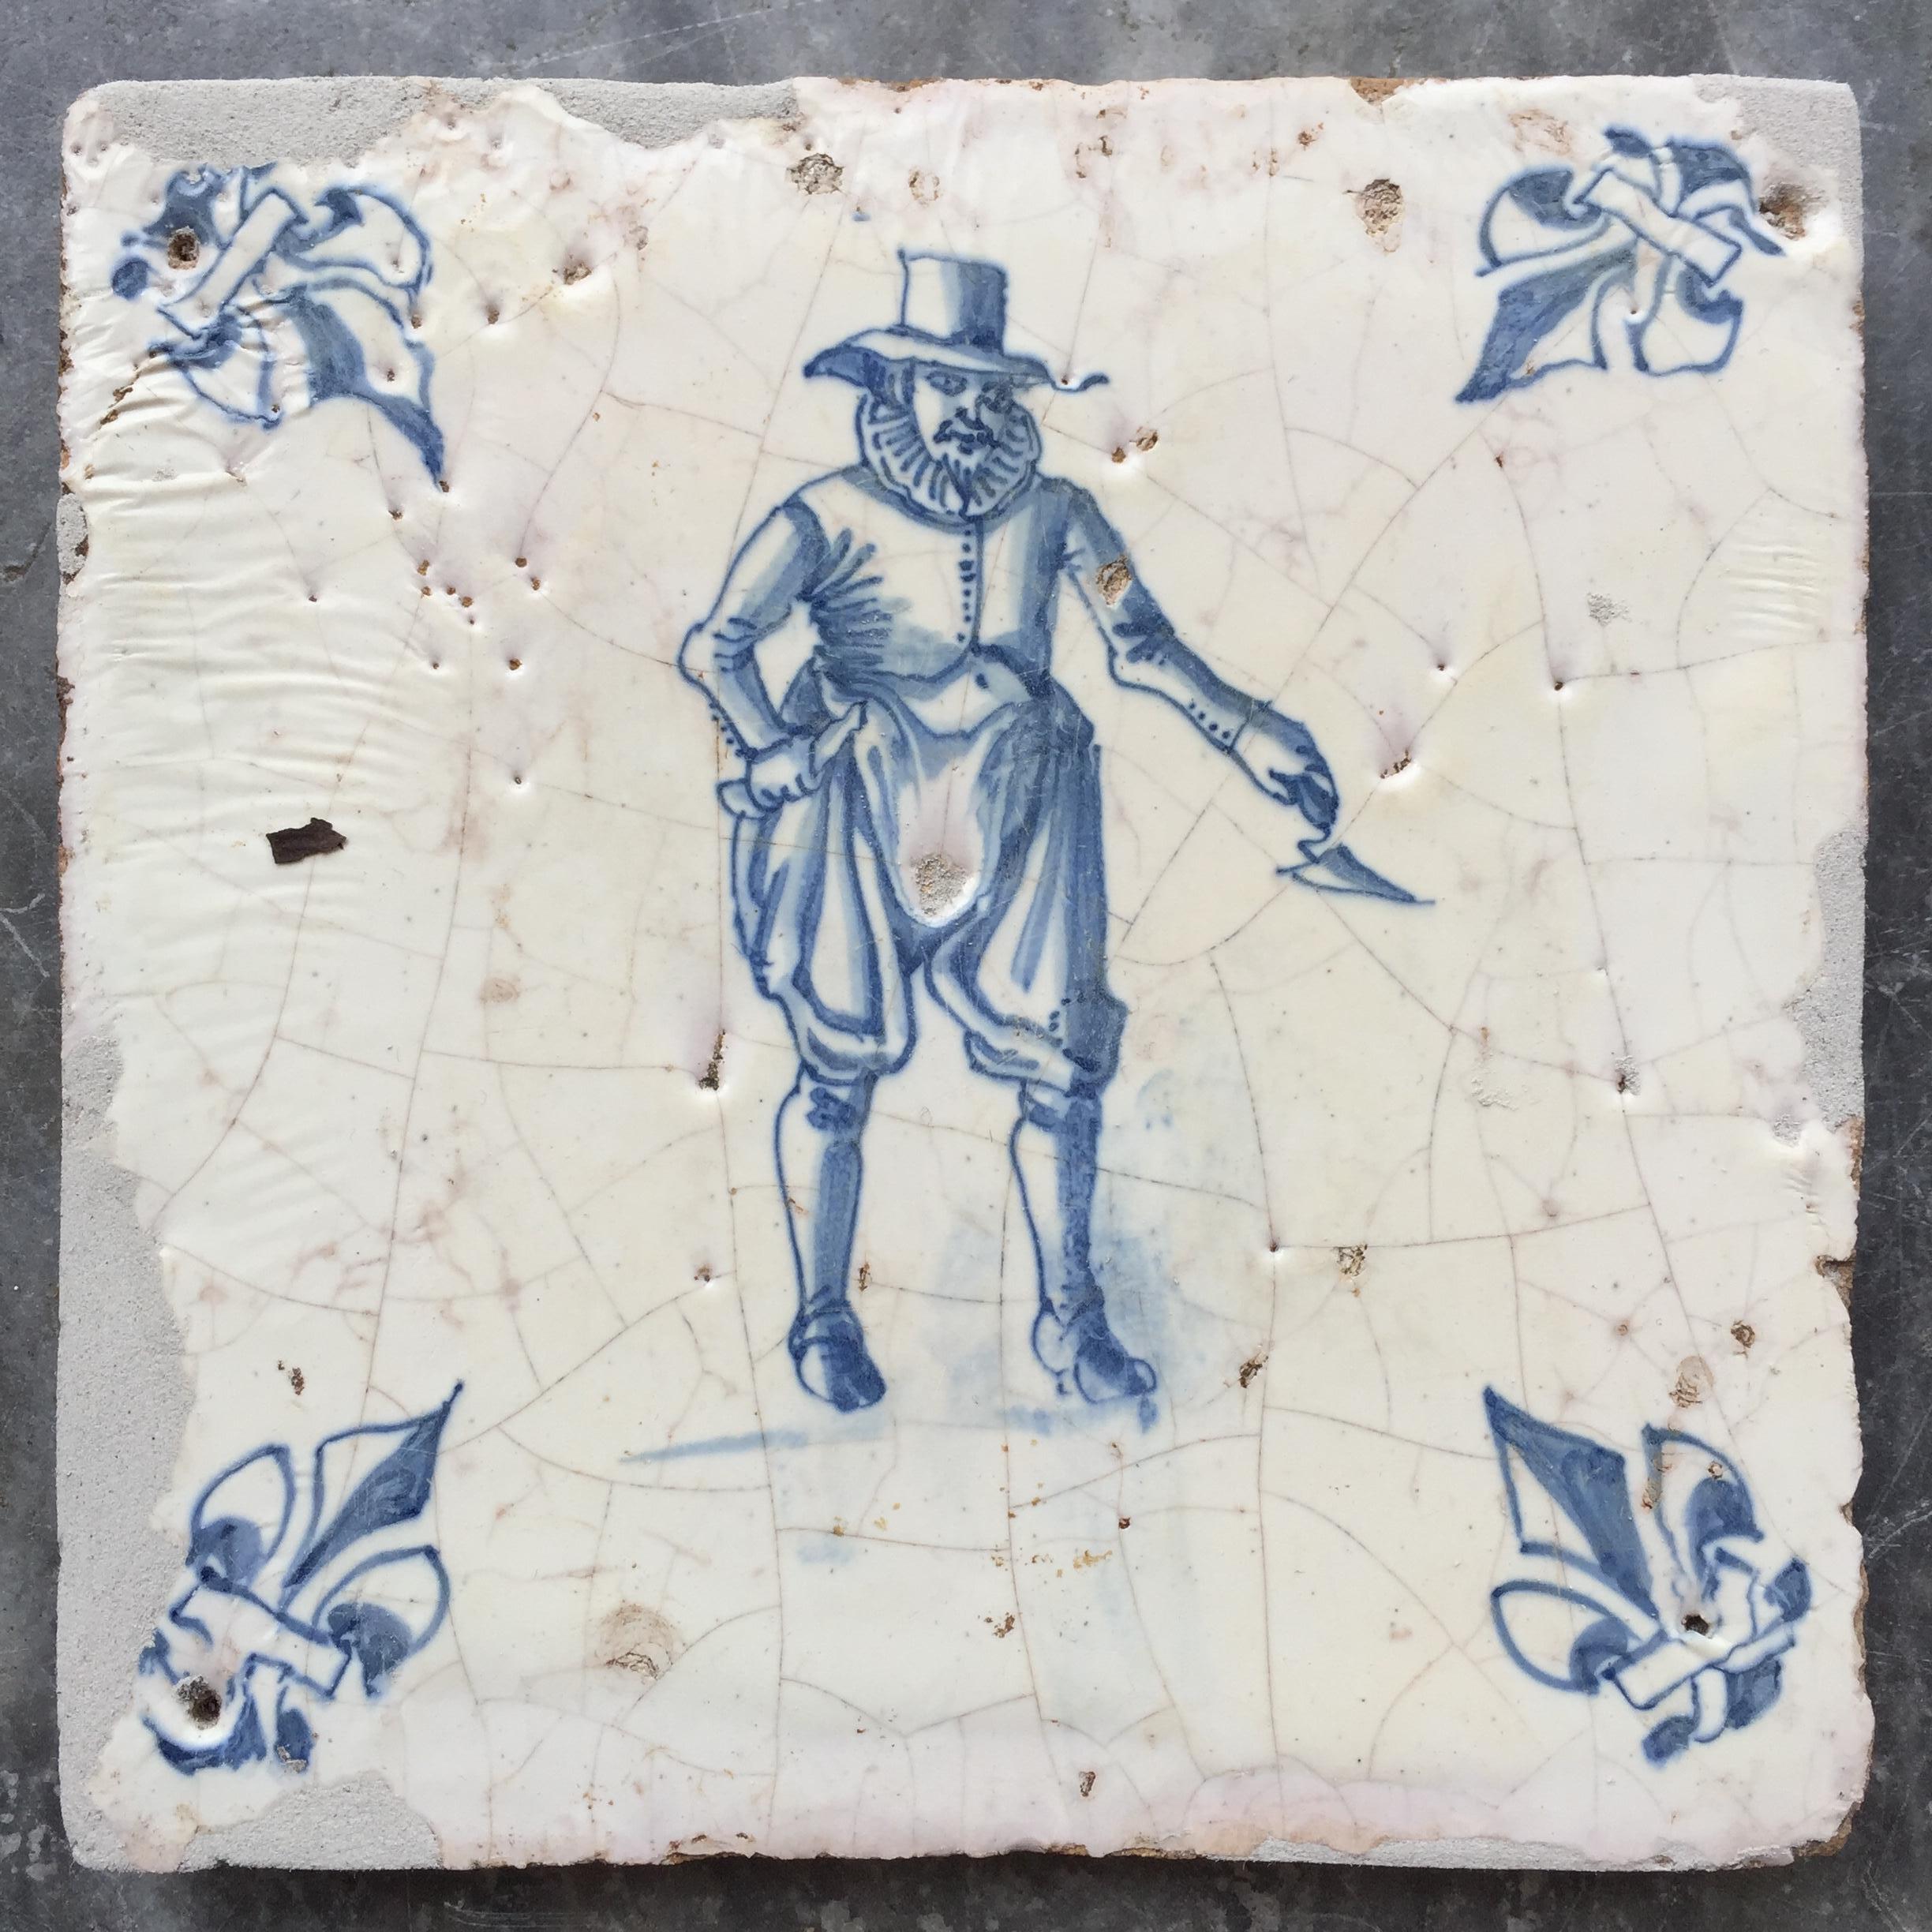 Exceptional Set of 20 Blue and White Dutch Delft Tiles with Figures 2